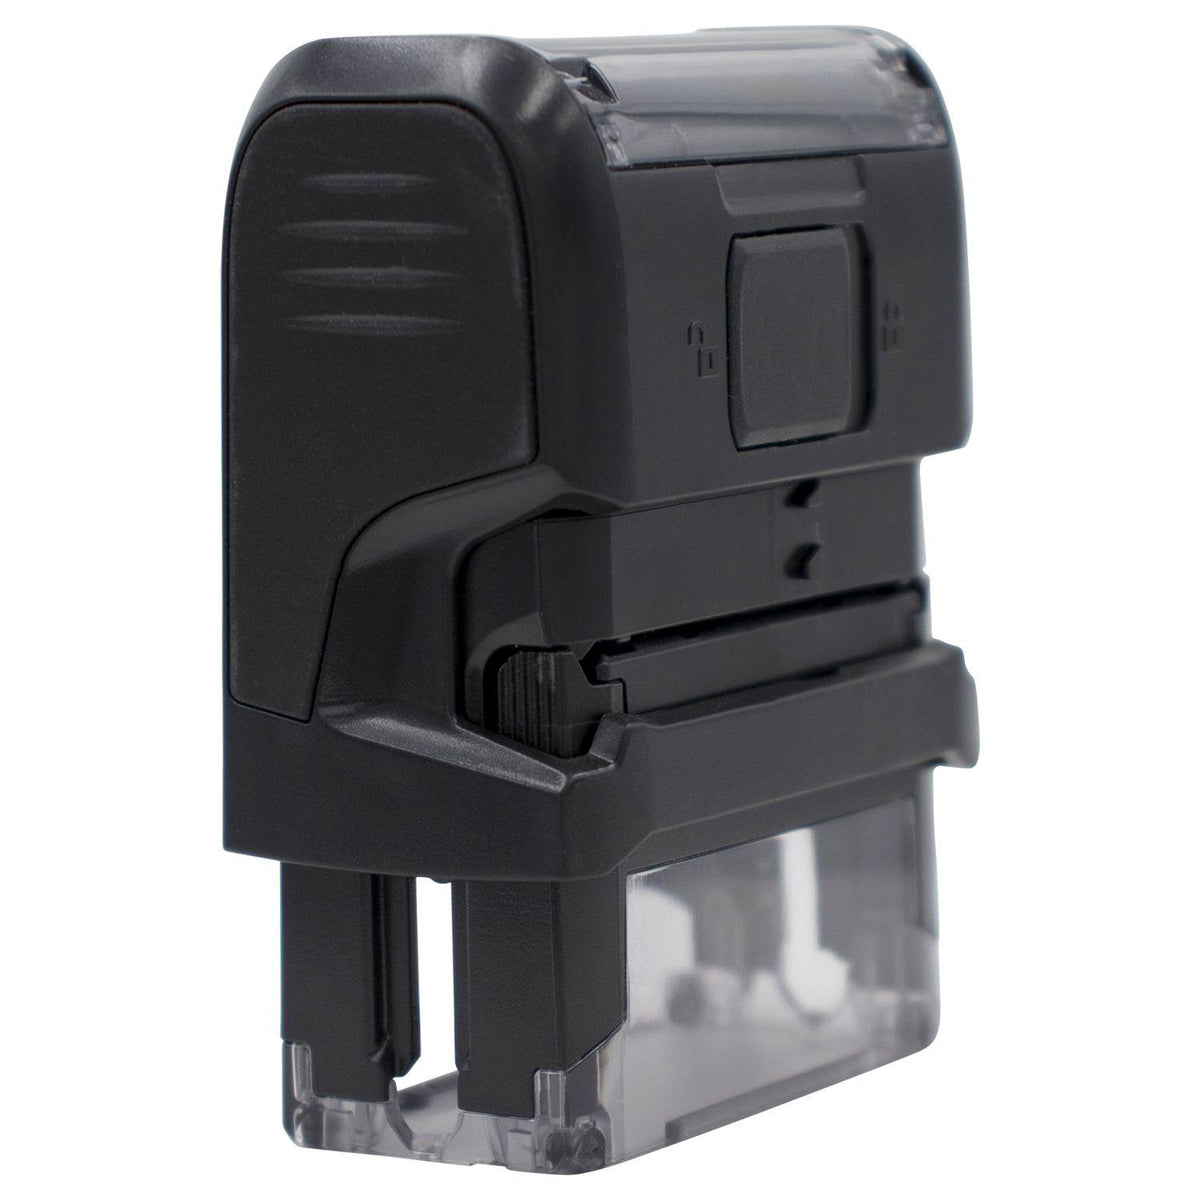 Self Inking Second Notice Stamp - Engineer Seal Stamps - Brand_Trodat, Impression Size_Small, Stamp Type_Self-Inking Stamp, Type of Use_Office, Type of Use_Postal &amp; Mailing, Type of Use_Shipping &amp; Receiving